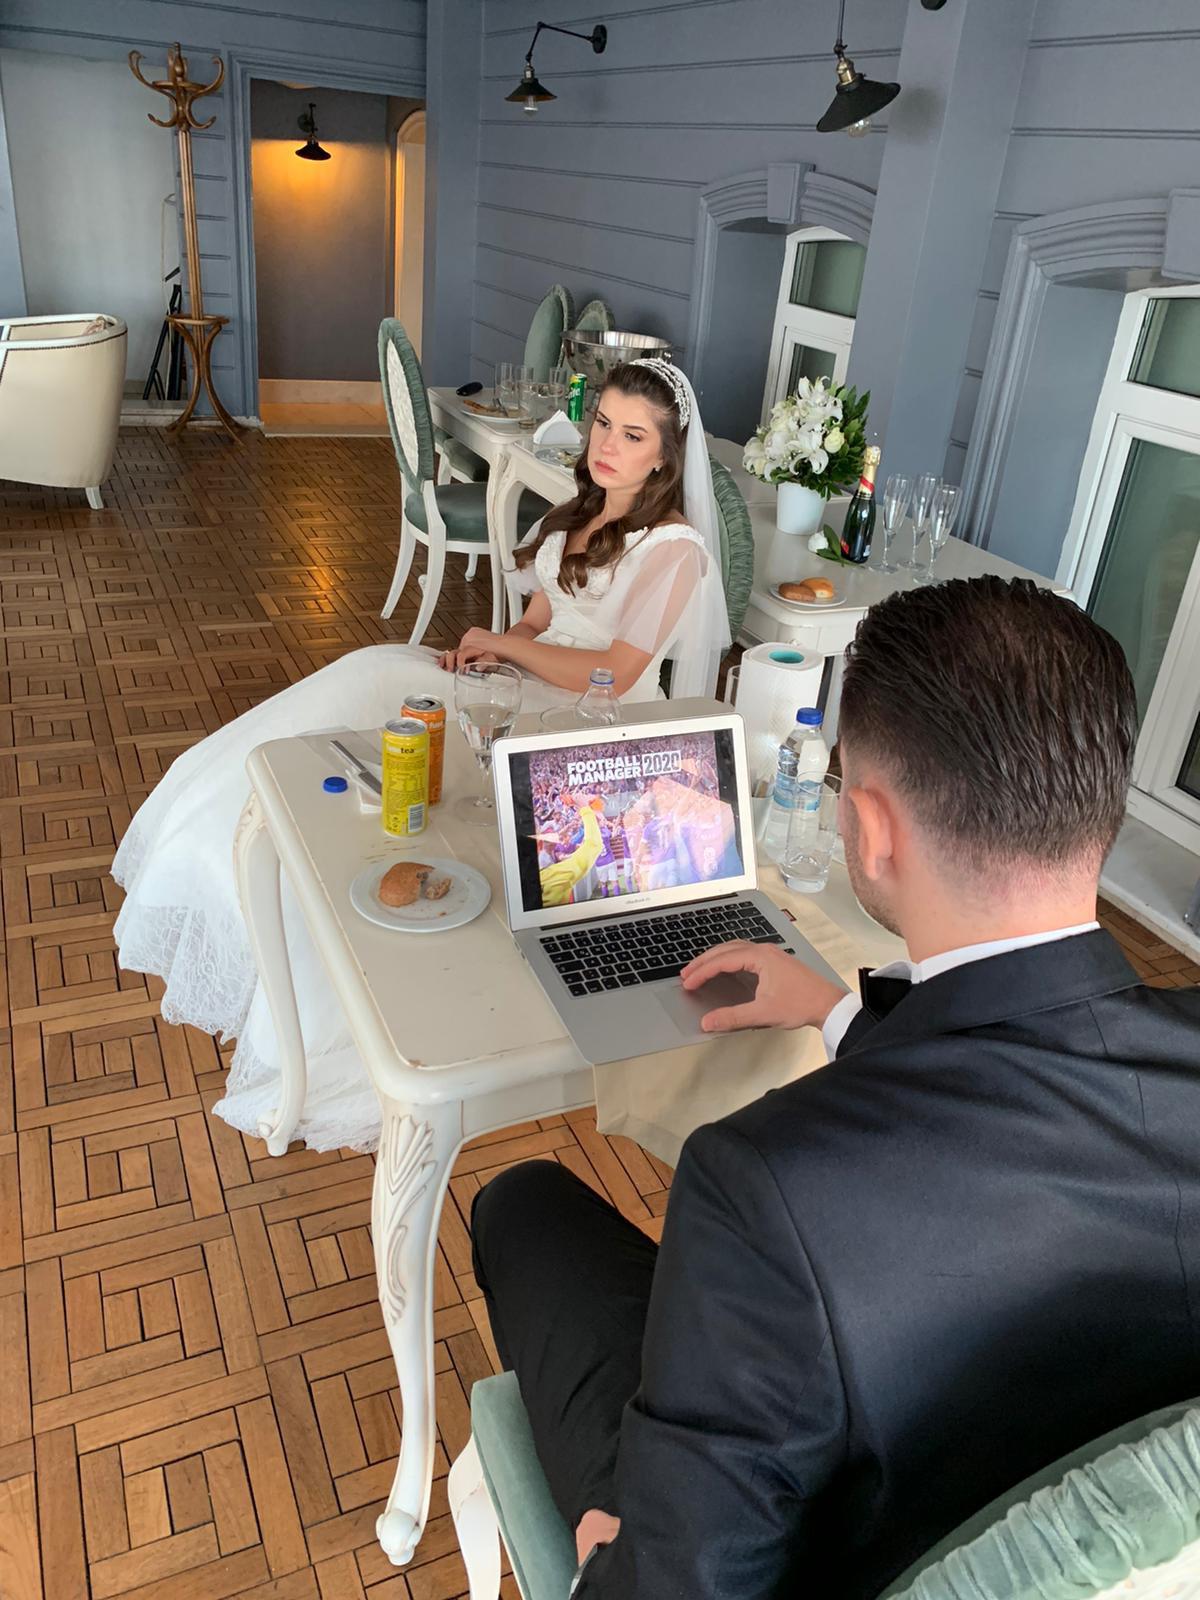 Crazy priority: 28-year old plays Football Manager, on his wedding day! - THE SPORTS ROOM